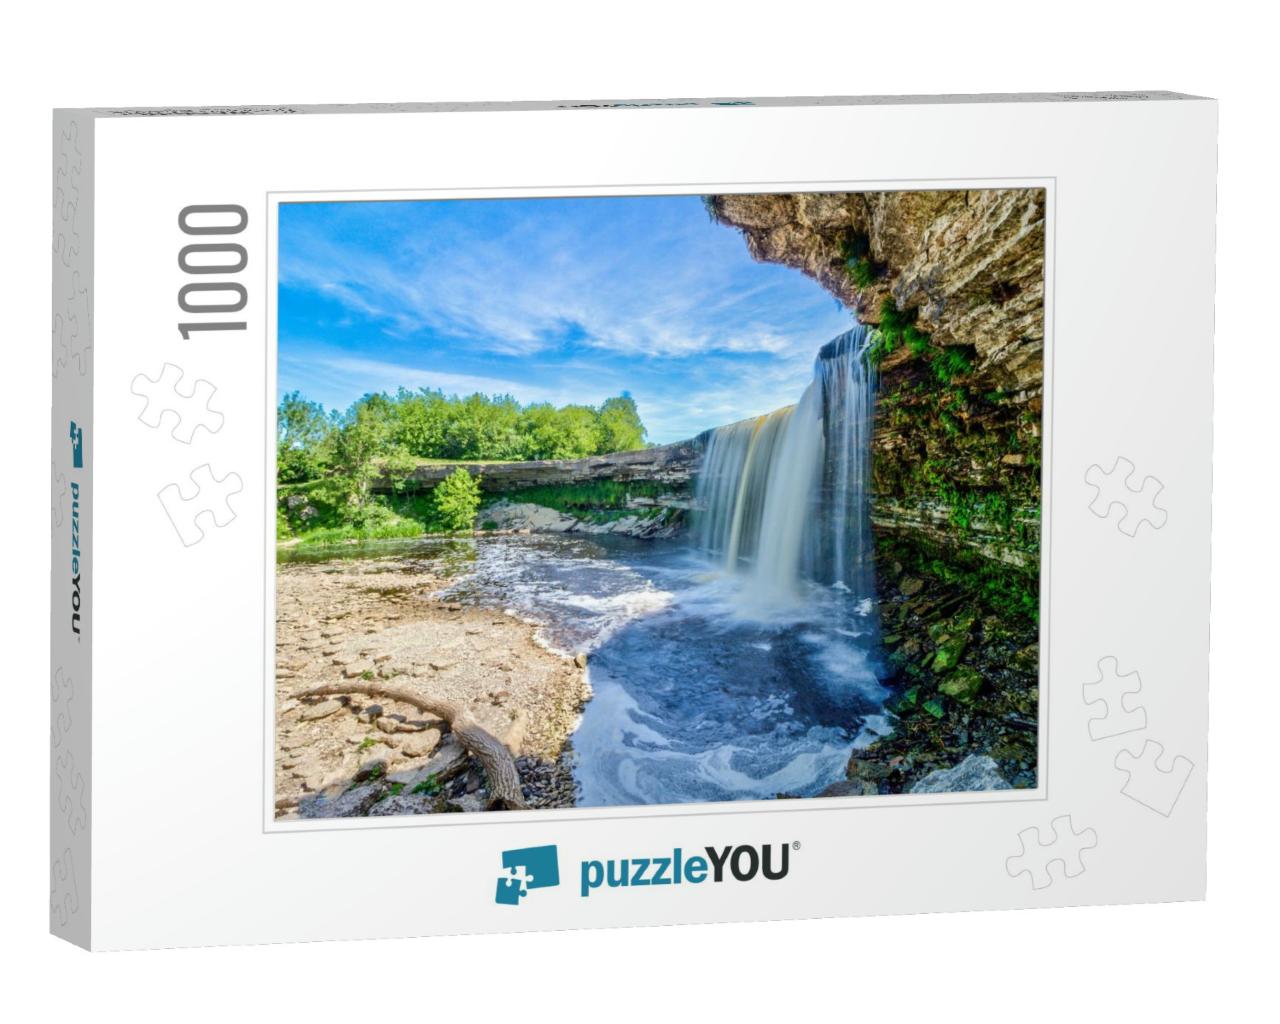 Jagala Waterfall Juga is Waterfall in Northern Estonia on... Jigsaw Puzzle with 1000 pieces